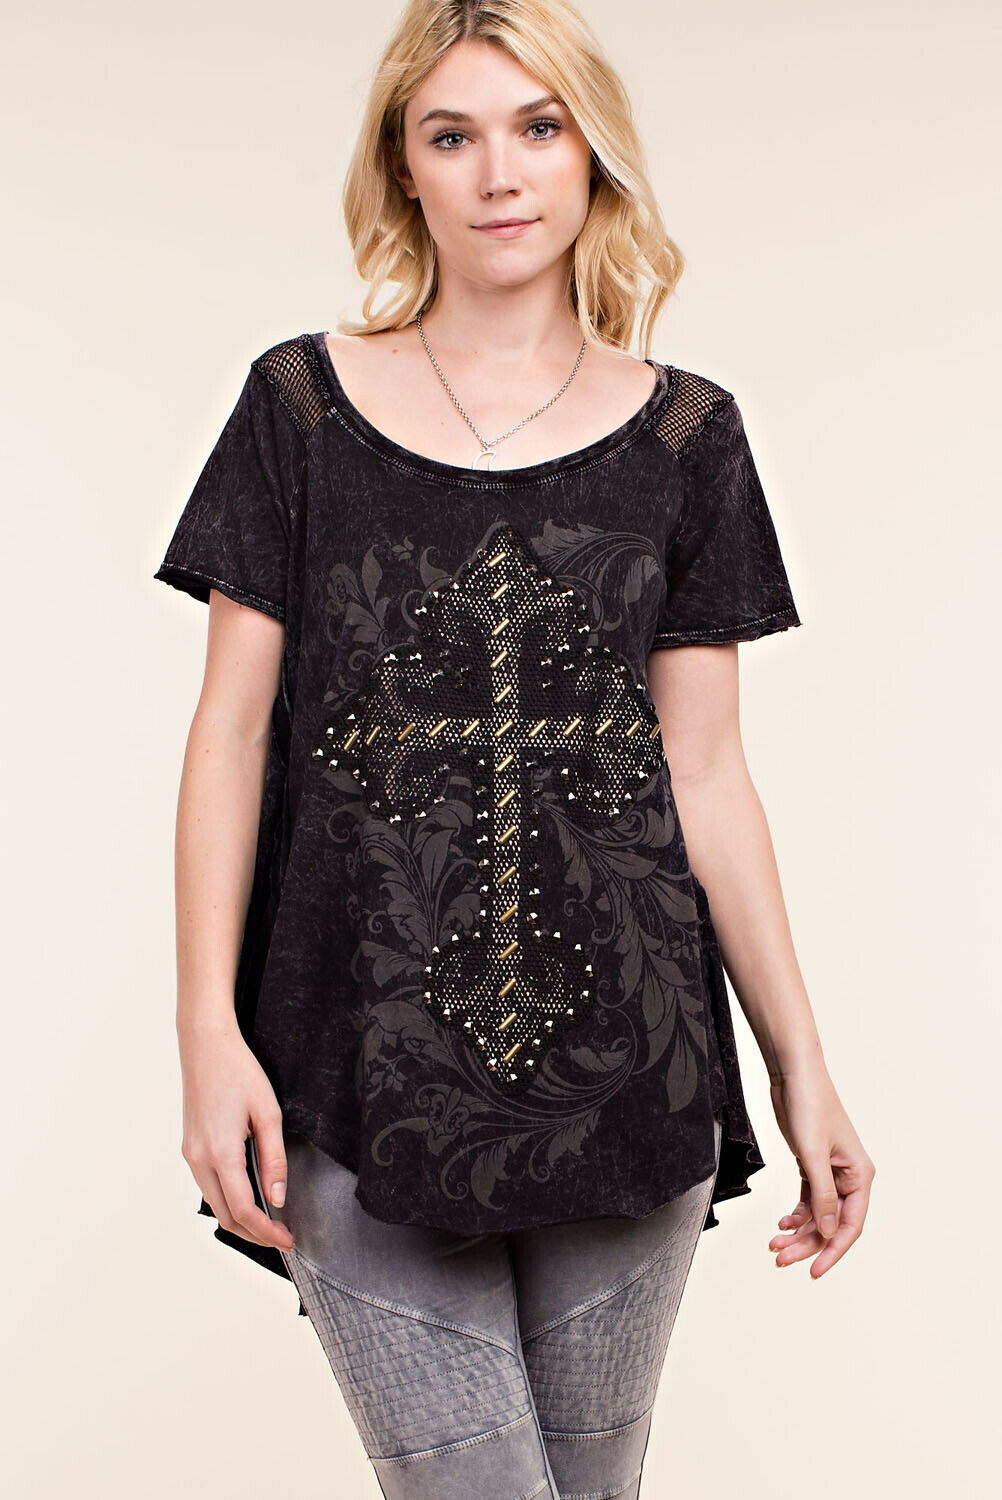 Primary image for Classic Long Black Tee with Studded Cross by Vocal  Apparel S, M, L, USA